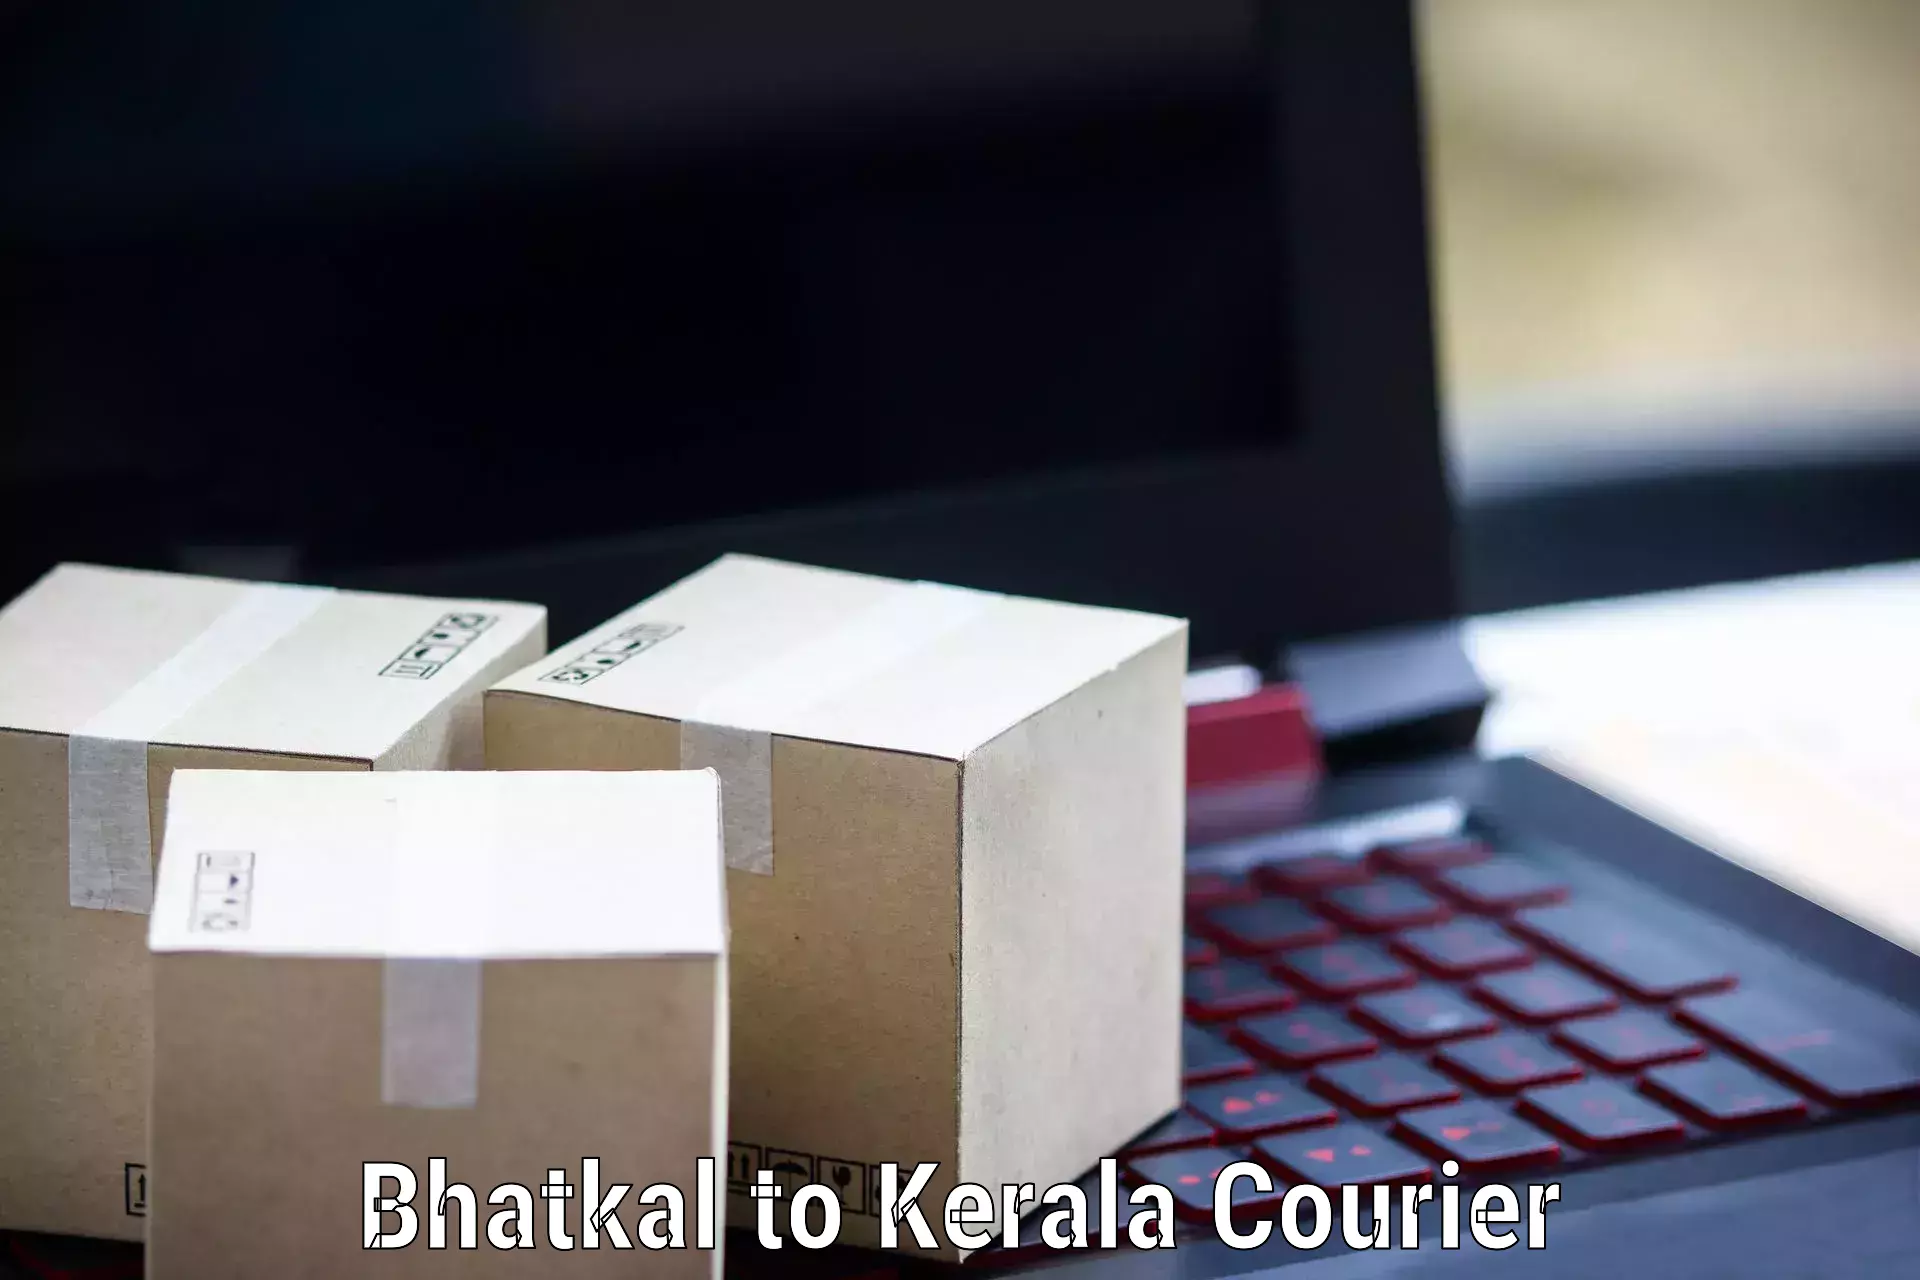 Global shipping solutions Bhatkal to Trivandrum